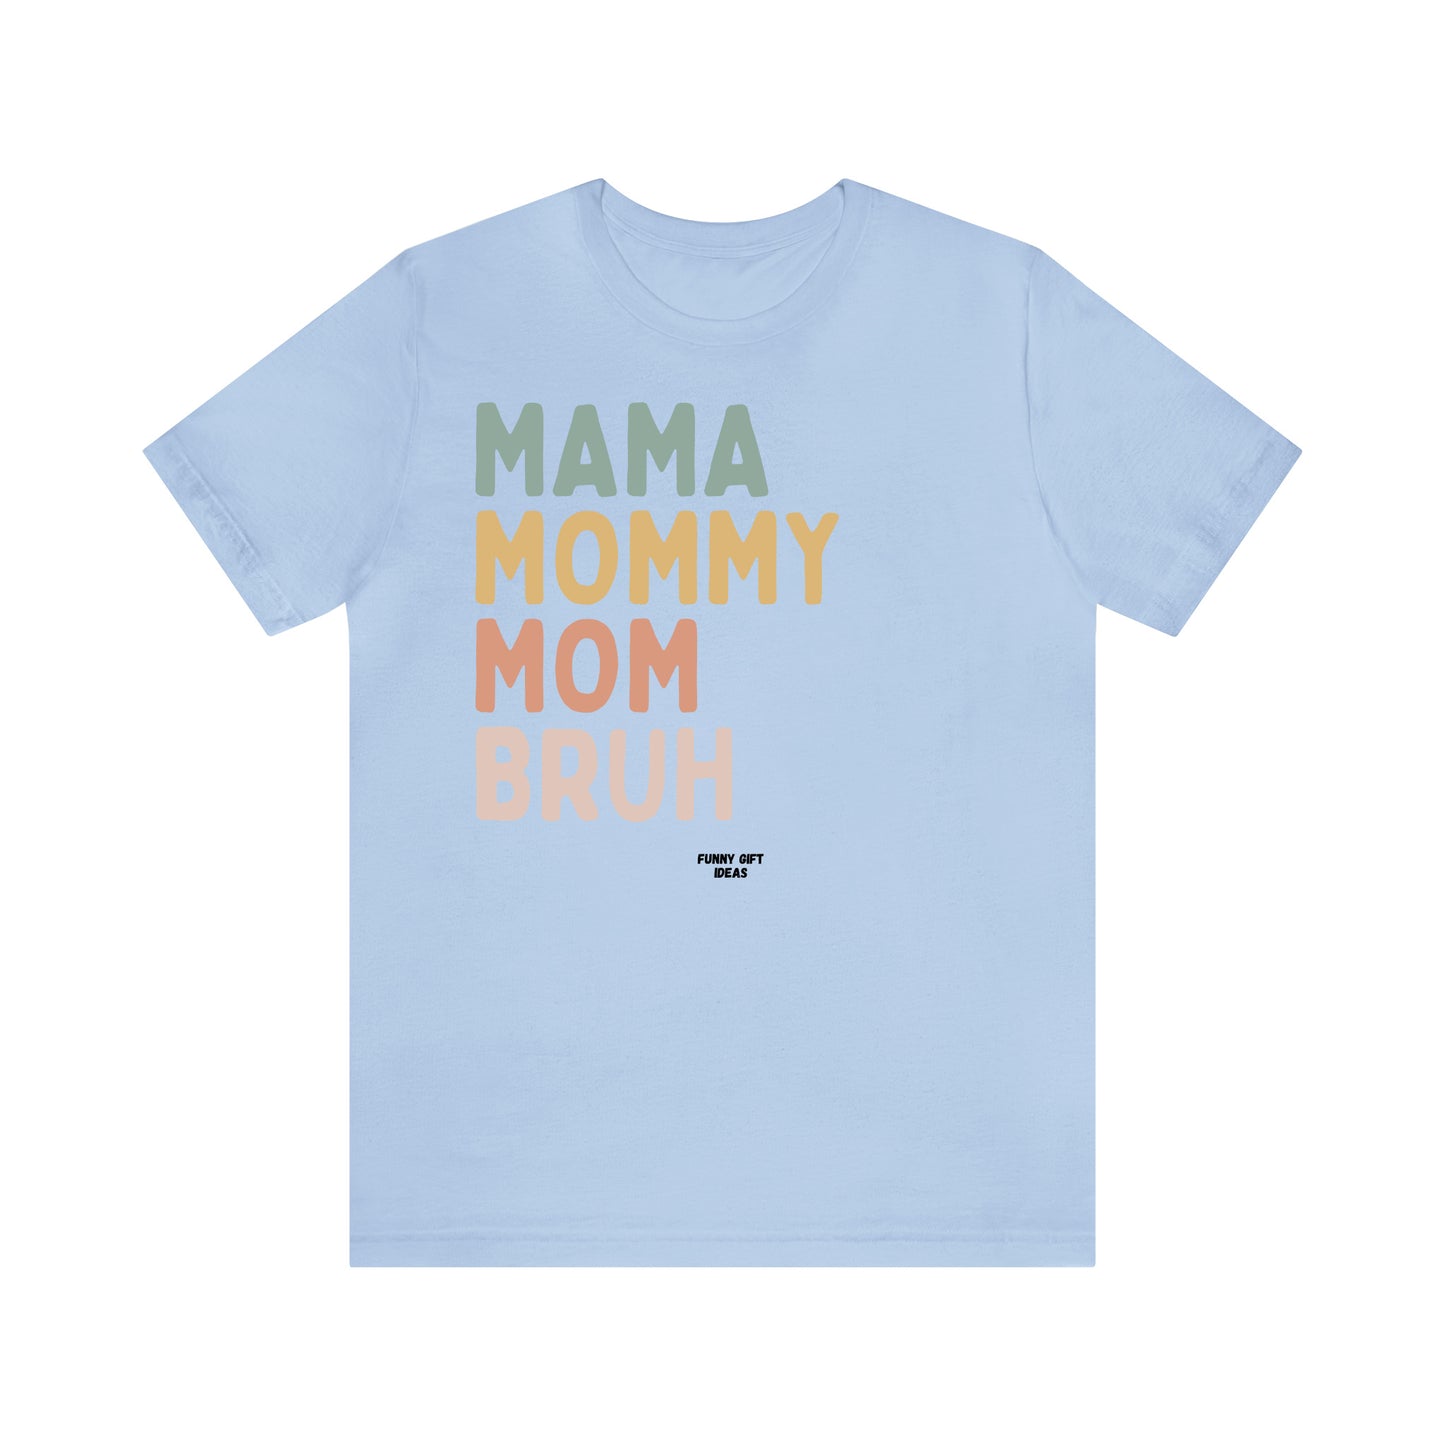 Funny Shirts for Women - Mama Mommy Mom Bruh - Women's T Shirts